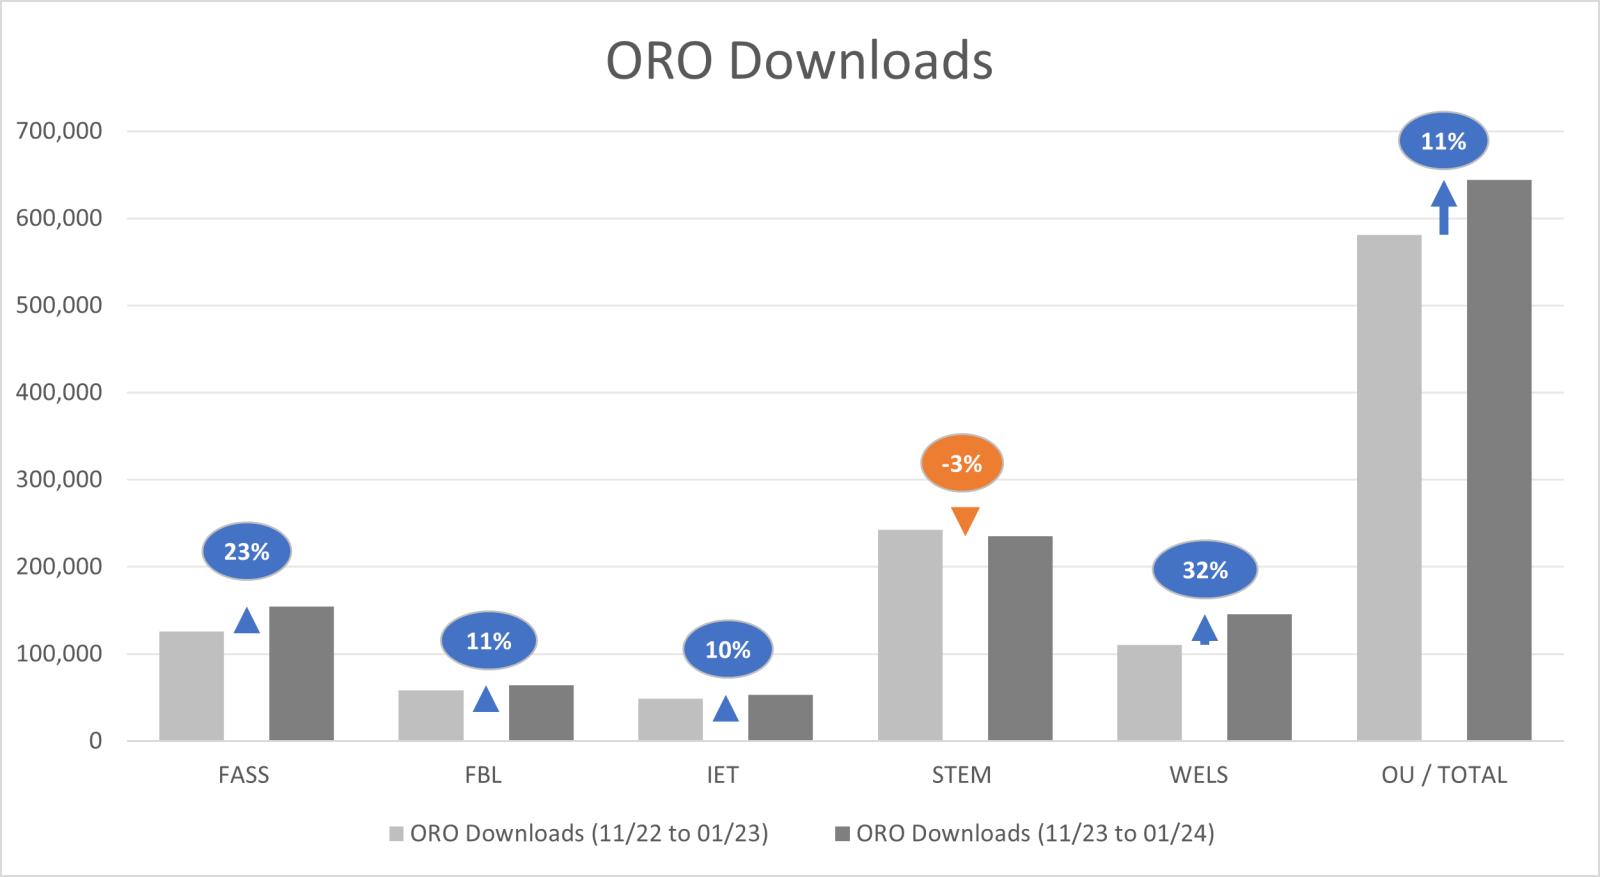 Bar chart depicting ORO downloads between November 2023 and January 2024